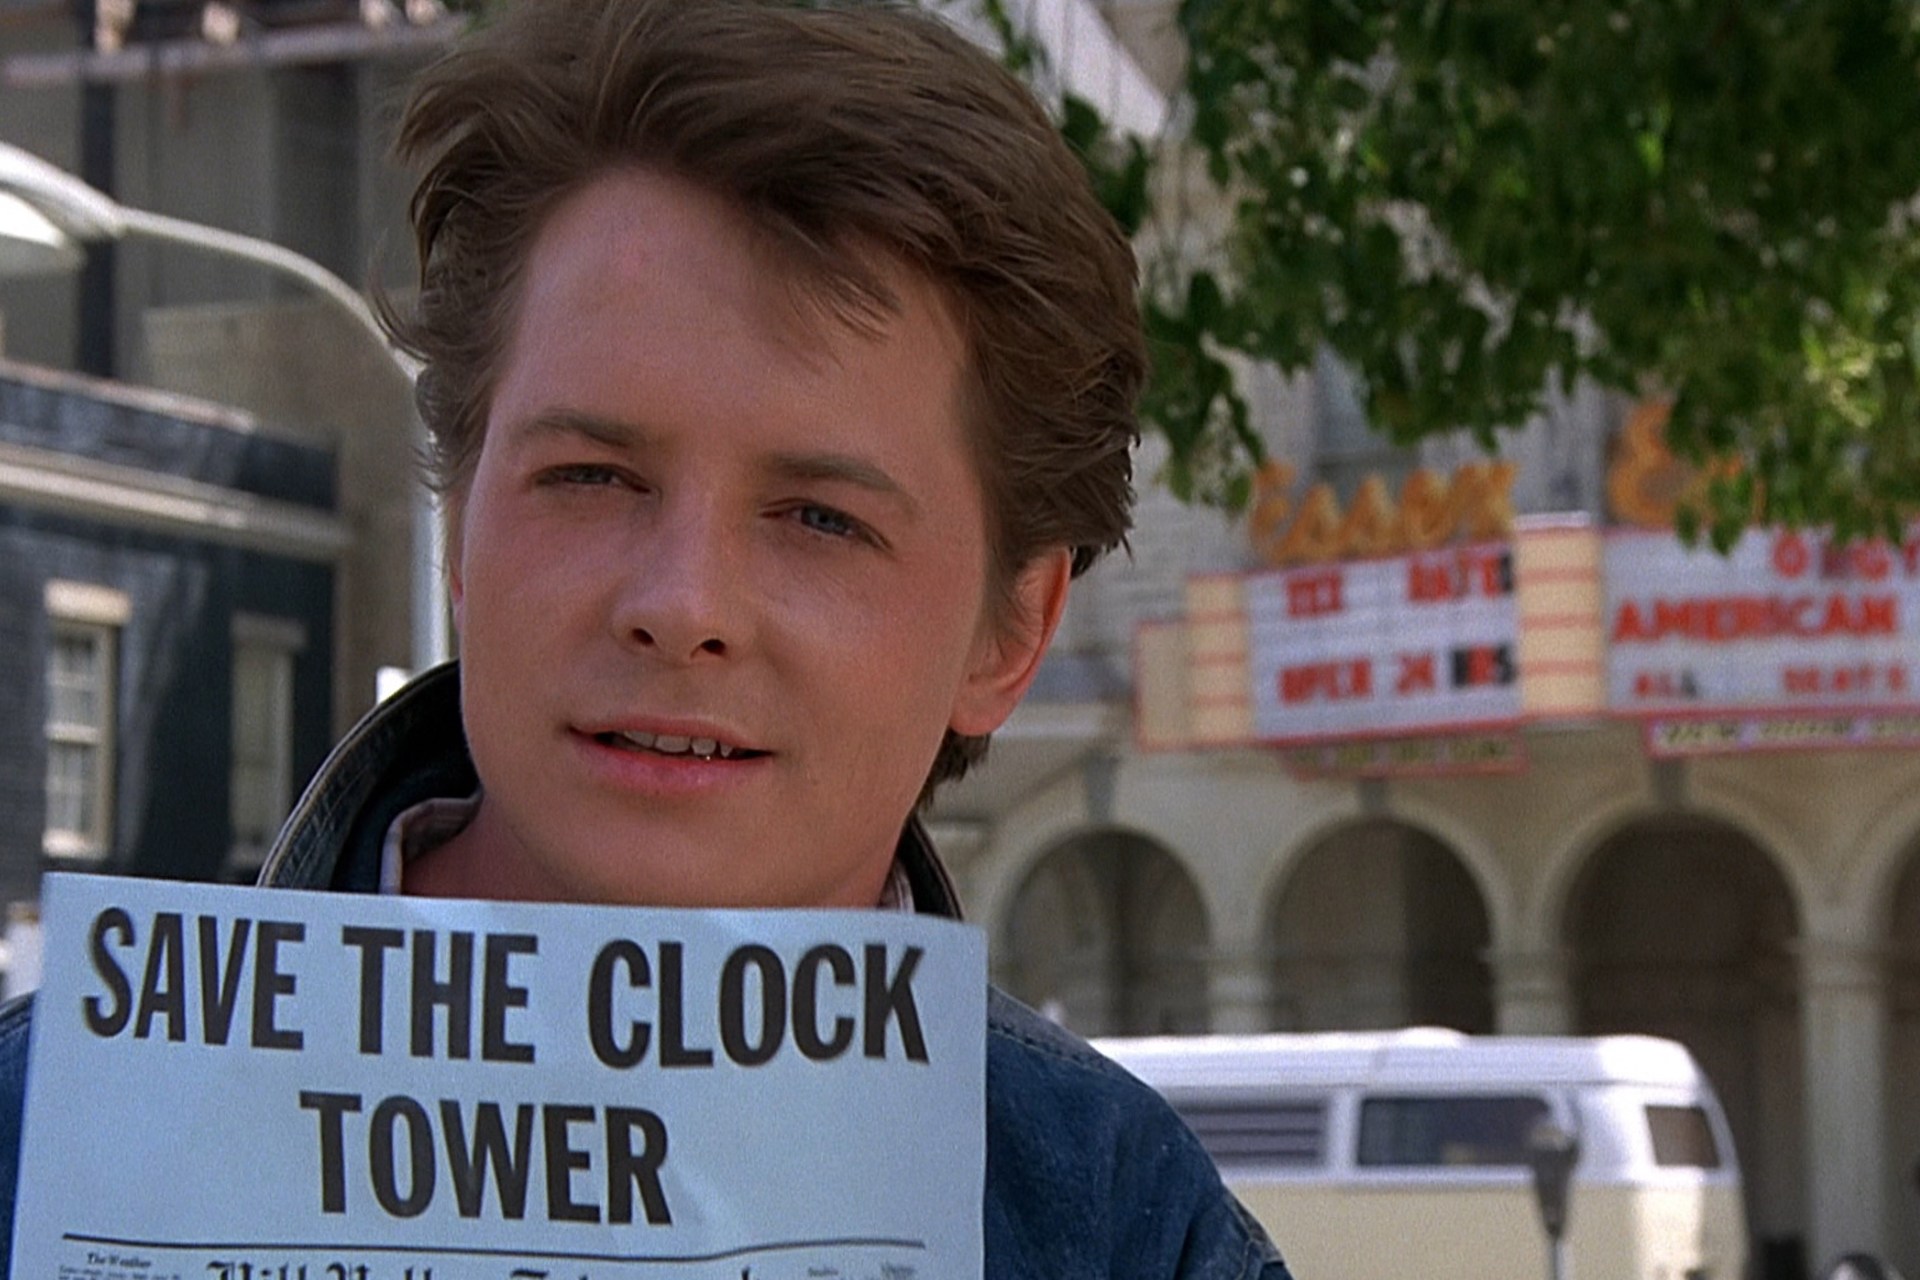 5 Reasons 'Back To The Future' Will Go Down In History As The Greatest Movie Ever Made